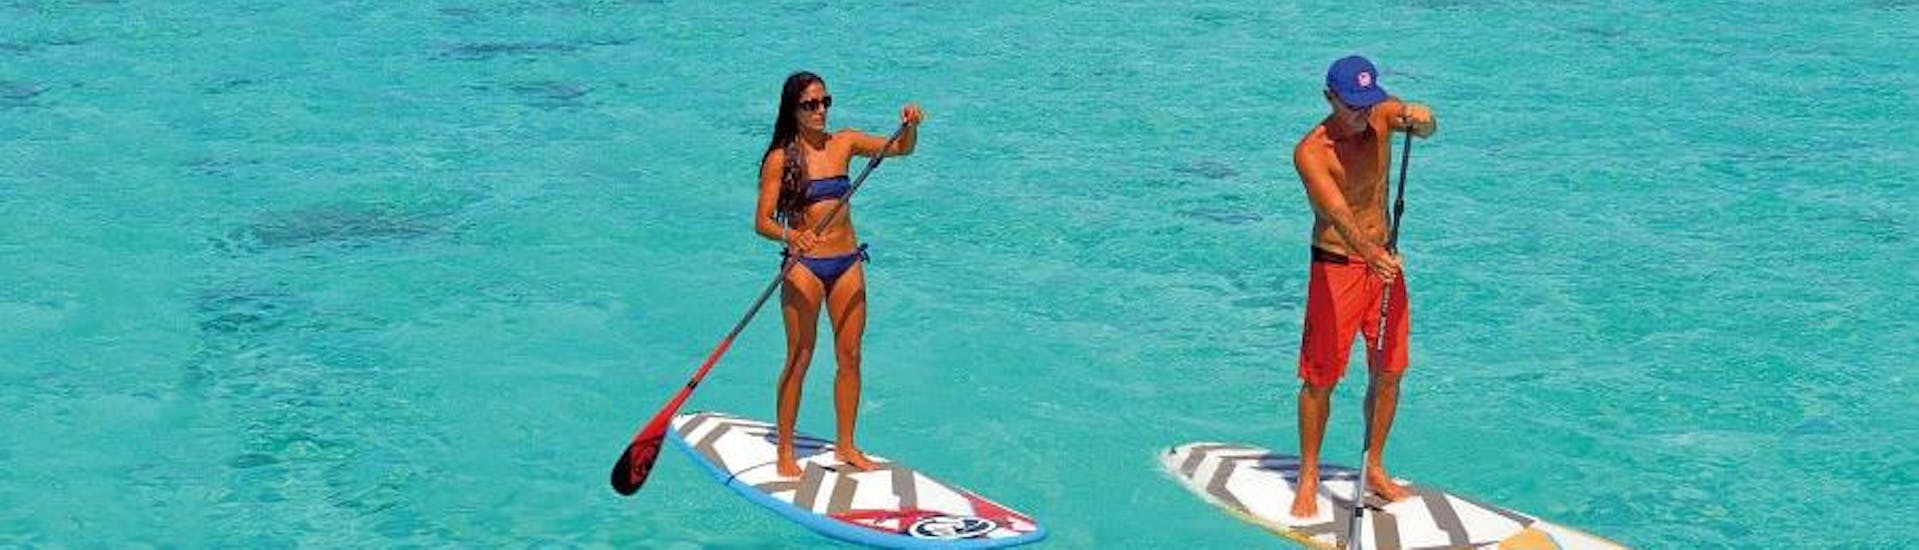 SUP Lessons for Children from 10 years & Adults -  Beginners.